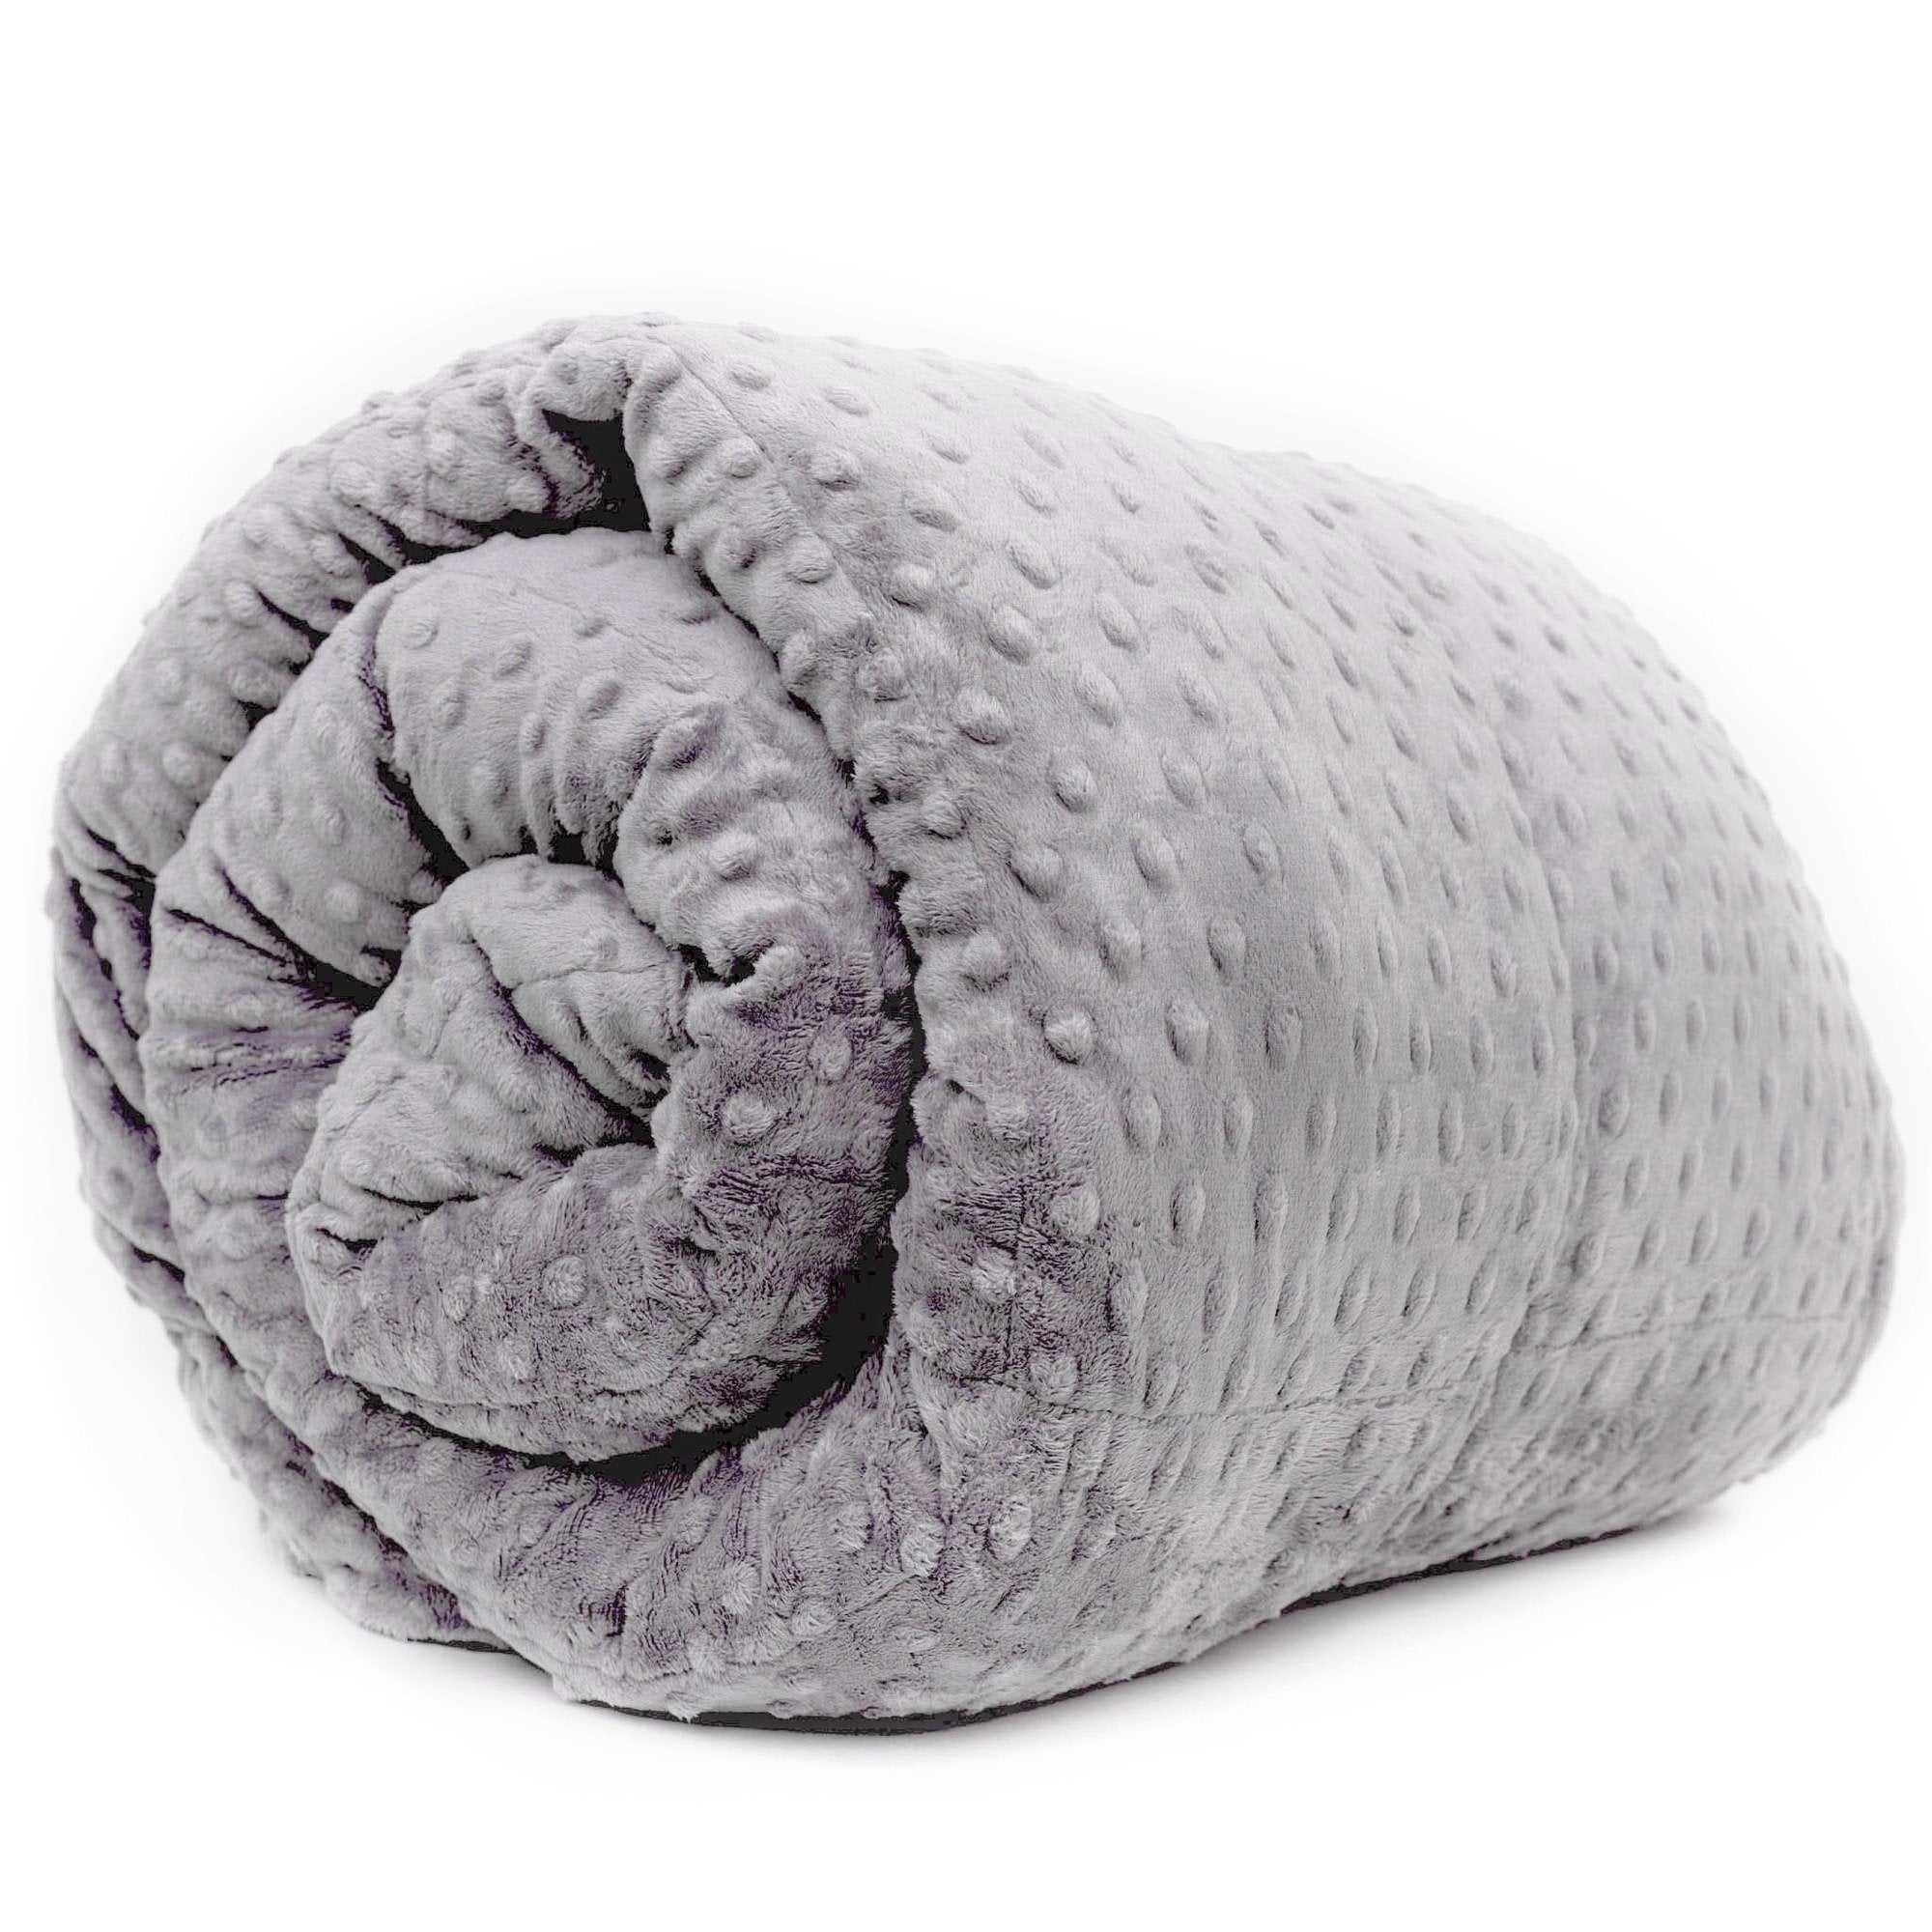 Minky and Sherpa Weighted Blanket